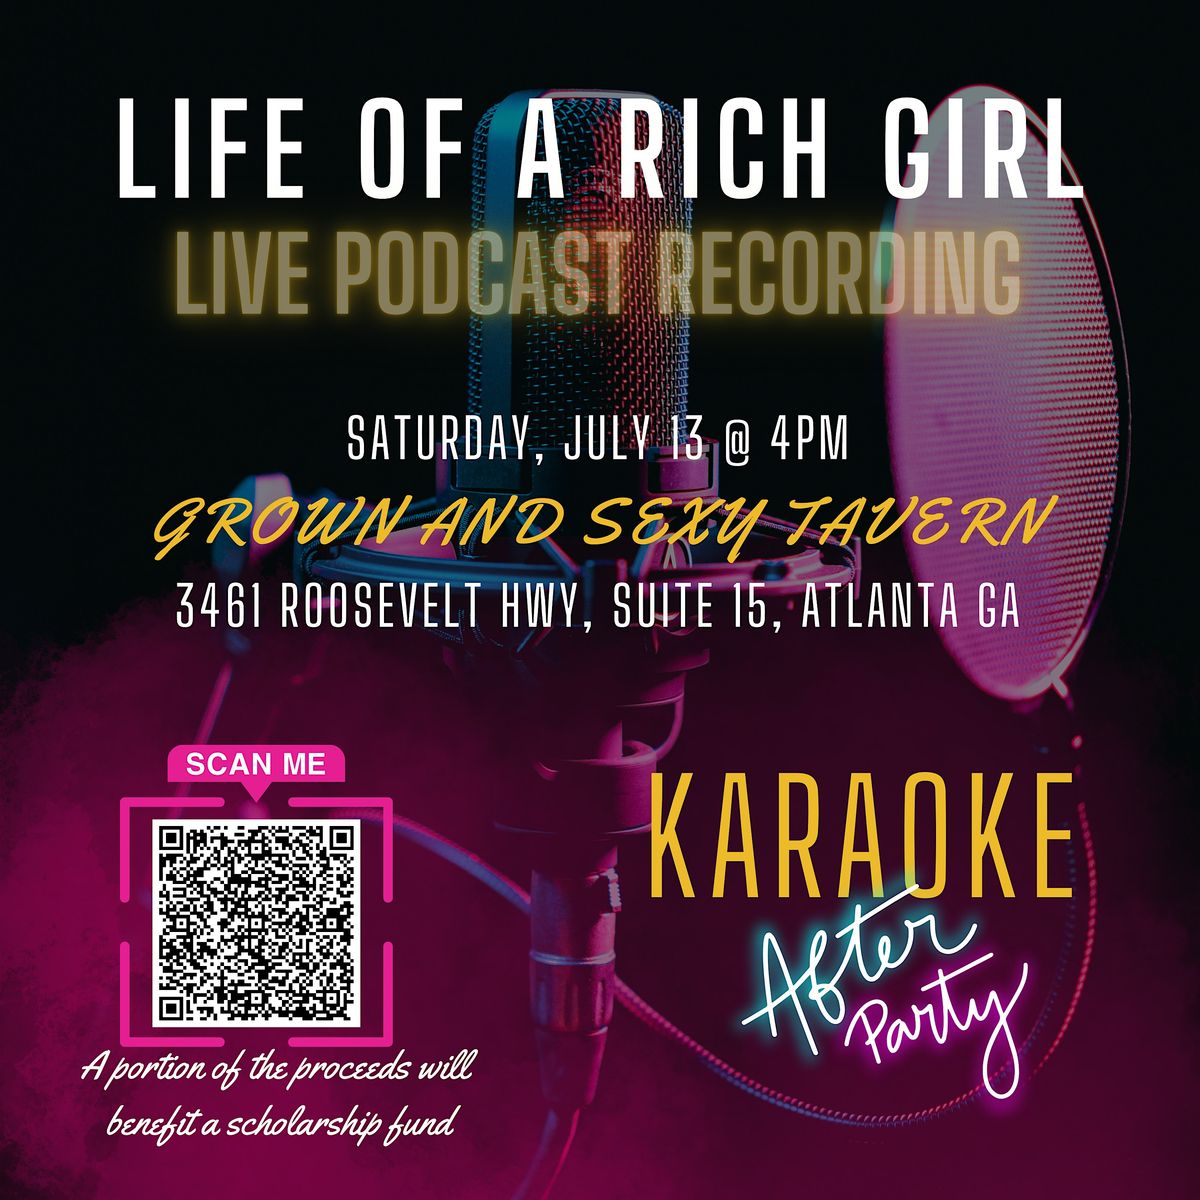 Rich Girls LIVE Podcast and KARAOKE Day Party